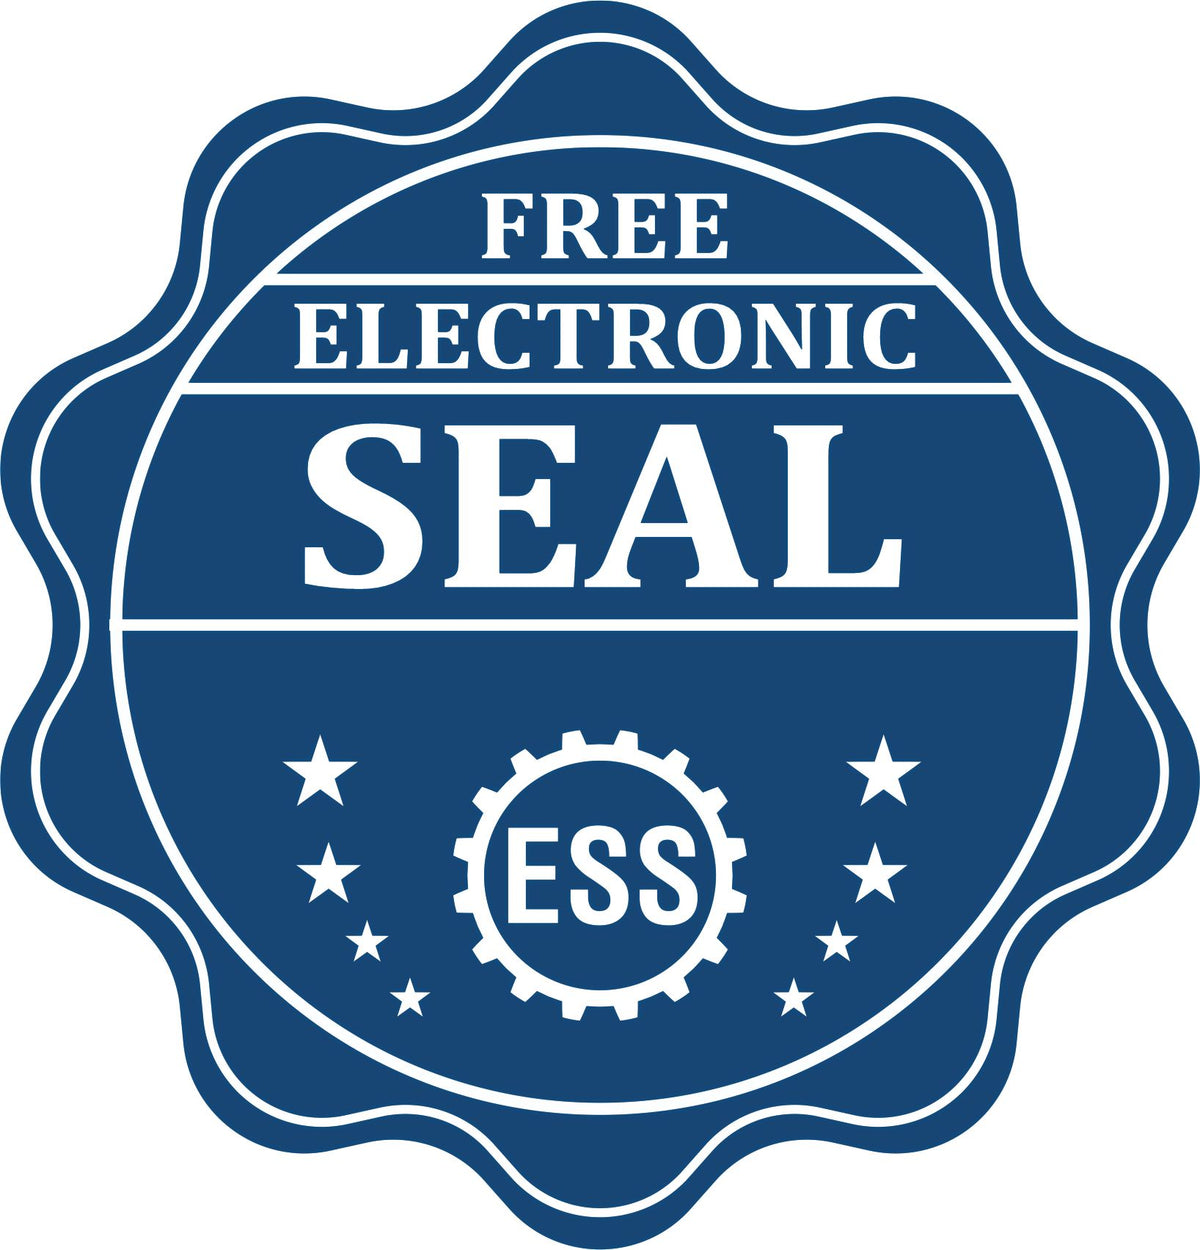 A badge showing a free electronic seal for the Hybrid Iowa Engineer Seal with stars and the ESS gear on the emblem.